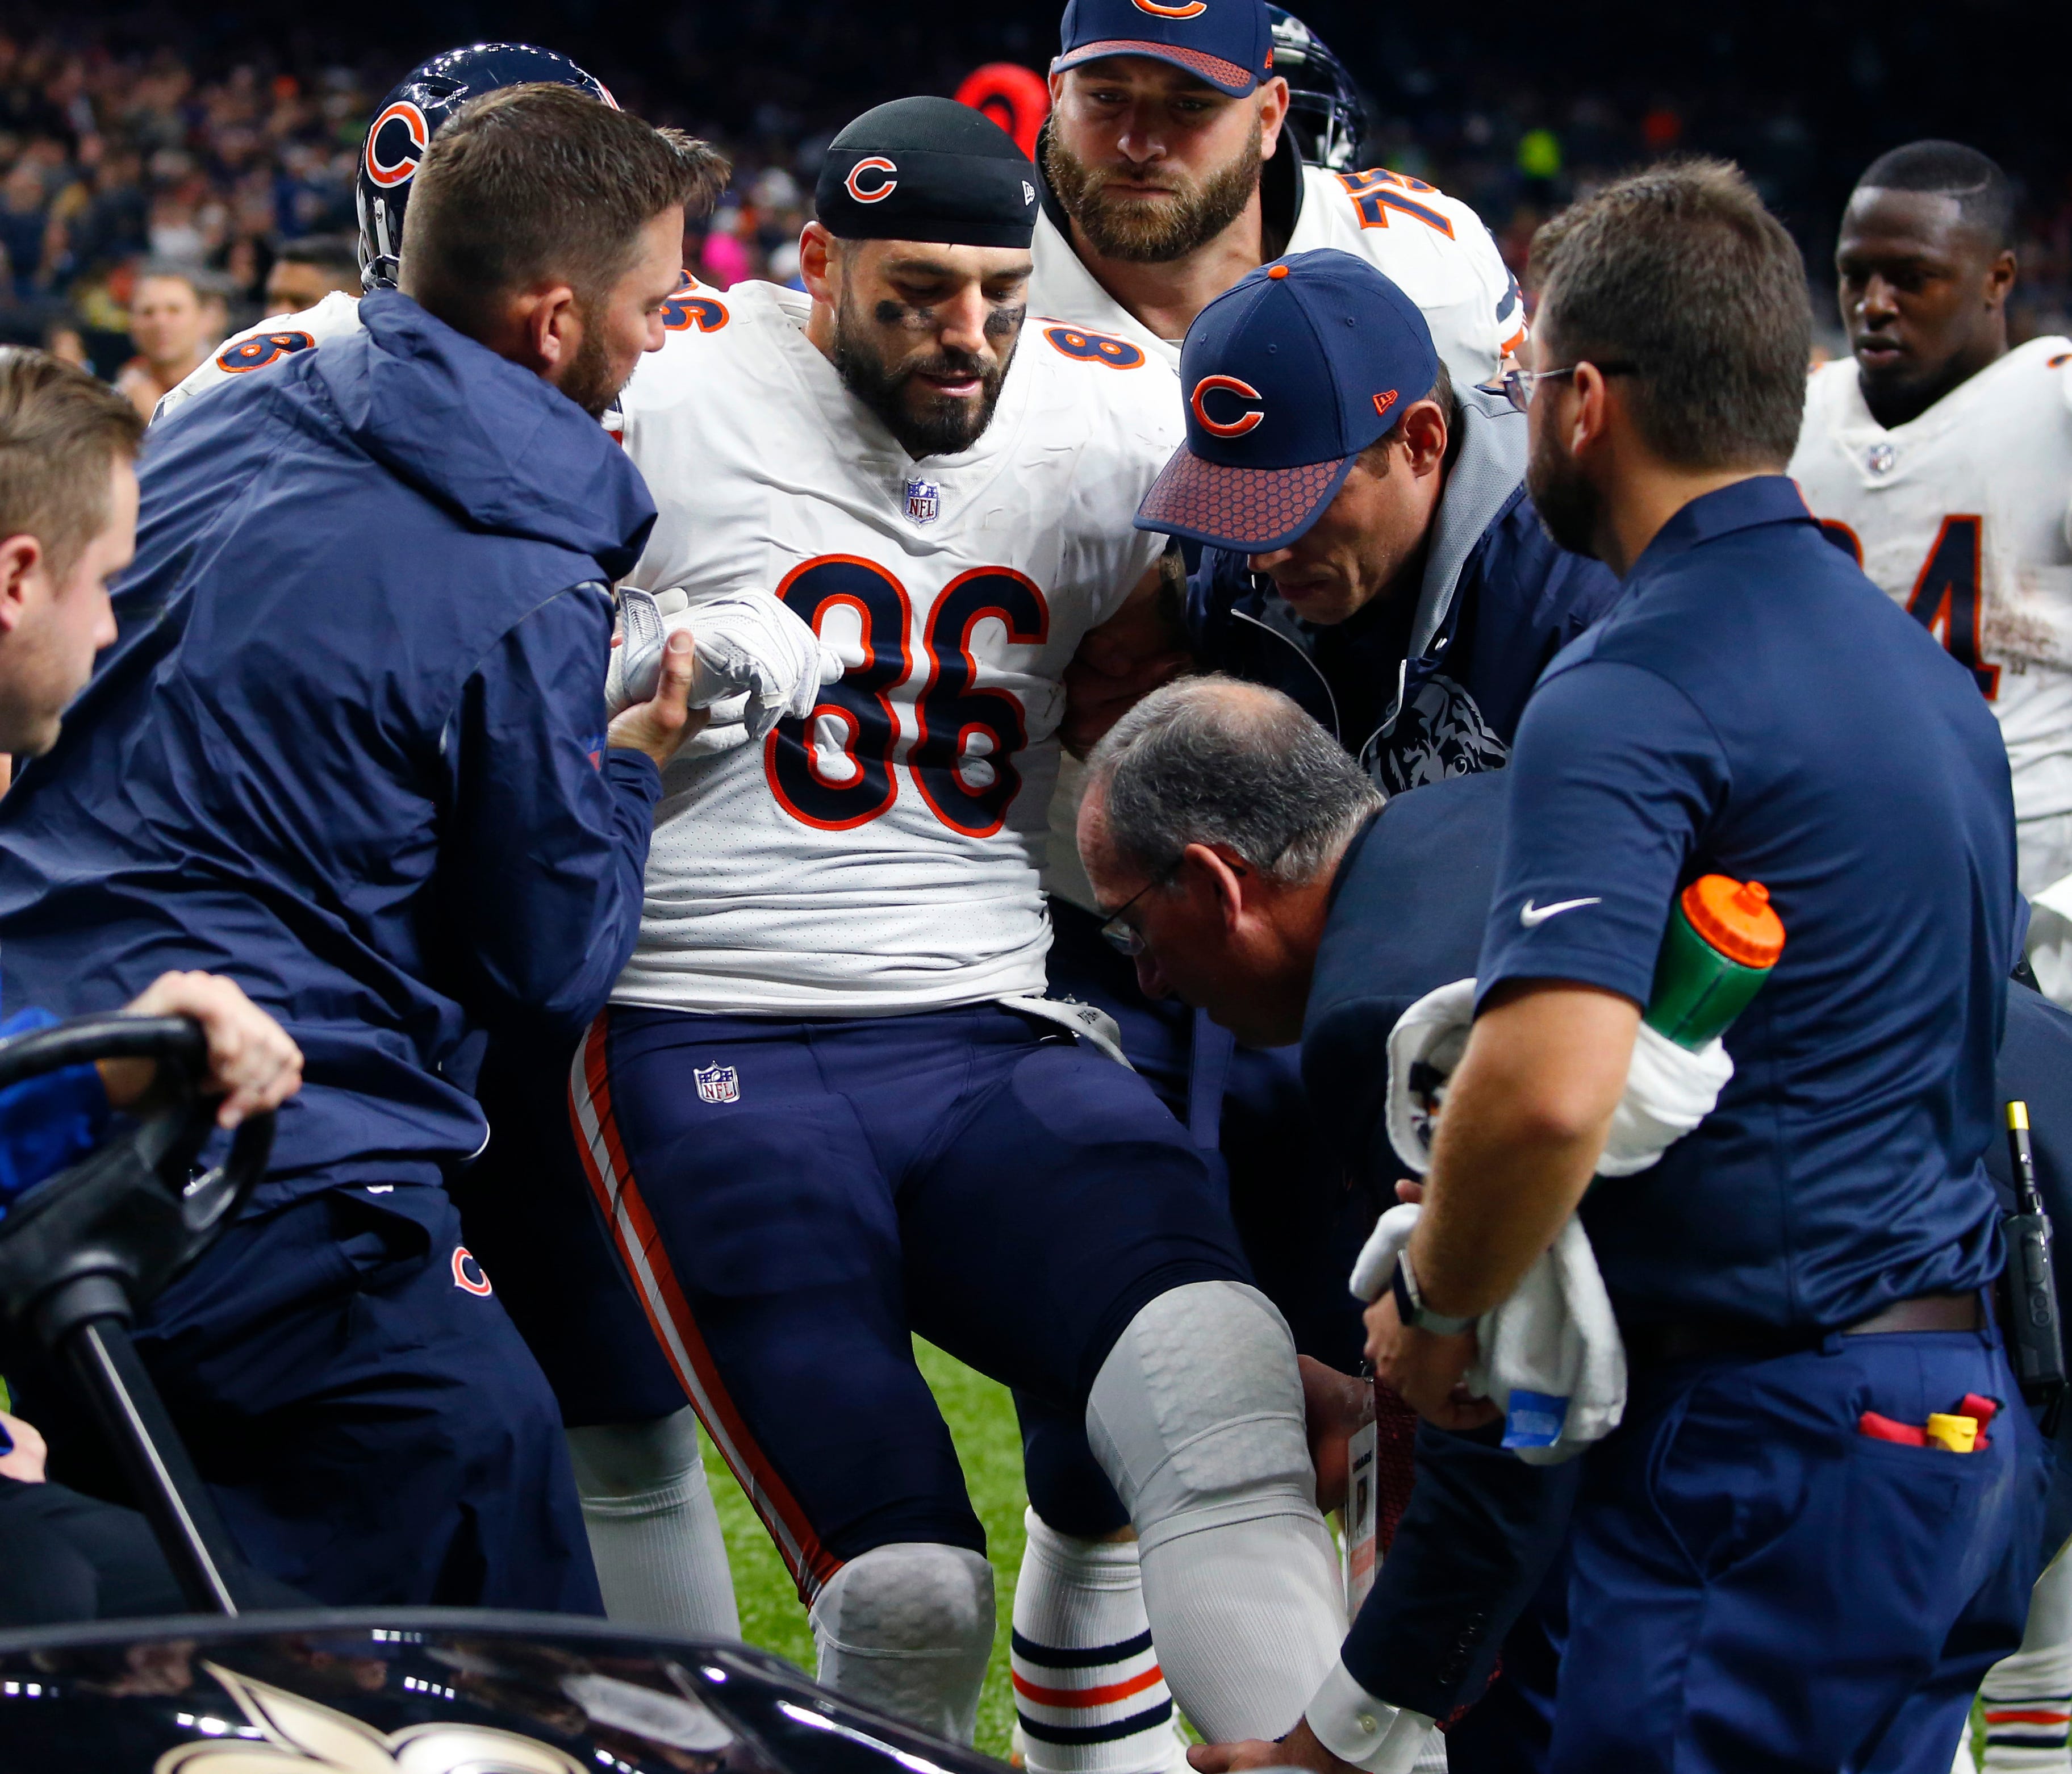 Chicago Bears tight end Zach Miller (86) is placed on a cart after injuring his leg in the second half of an NFL football game against the New Orleans Saints in New Orleans, Sunday, Oct. 29, 2017. Miller hurt his leg on an apparent touchdown receptio